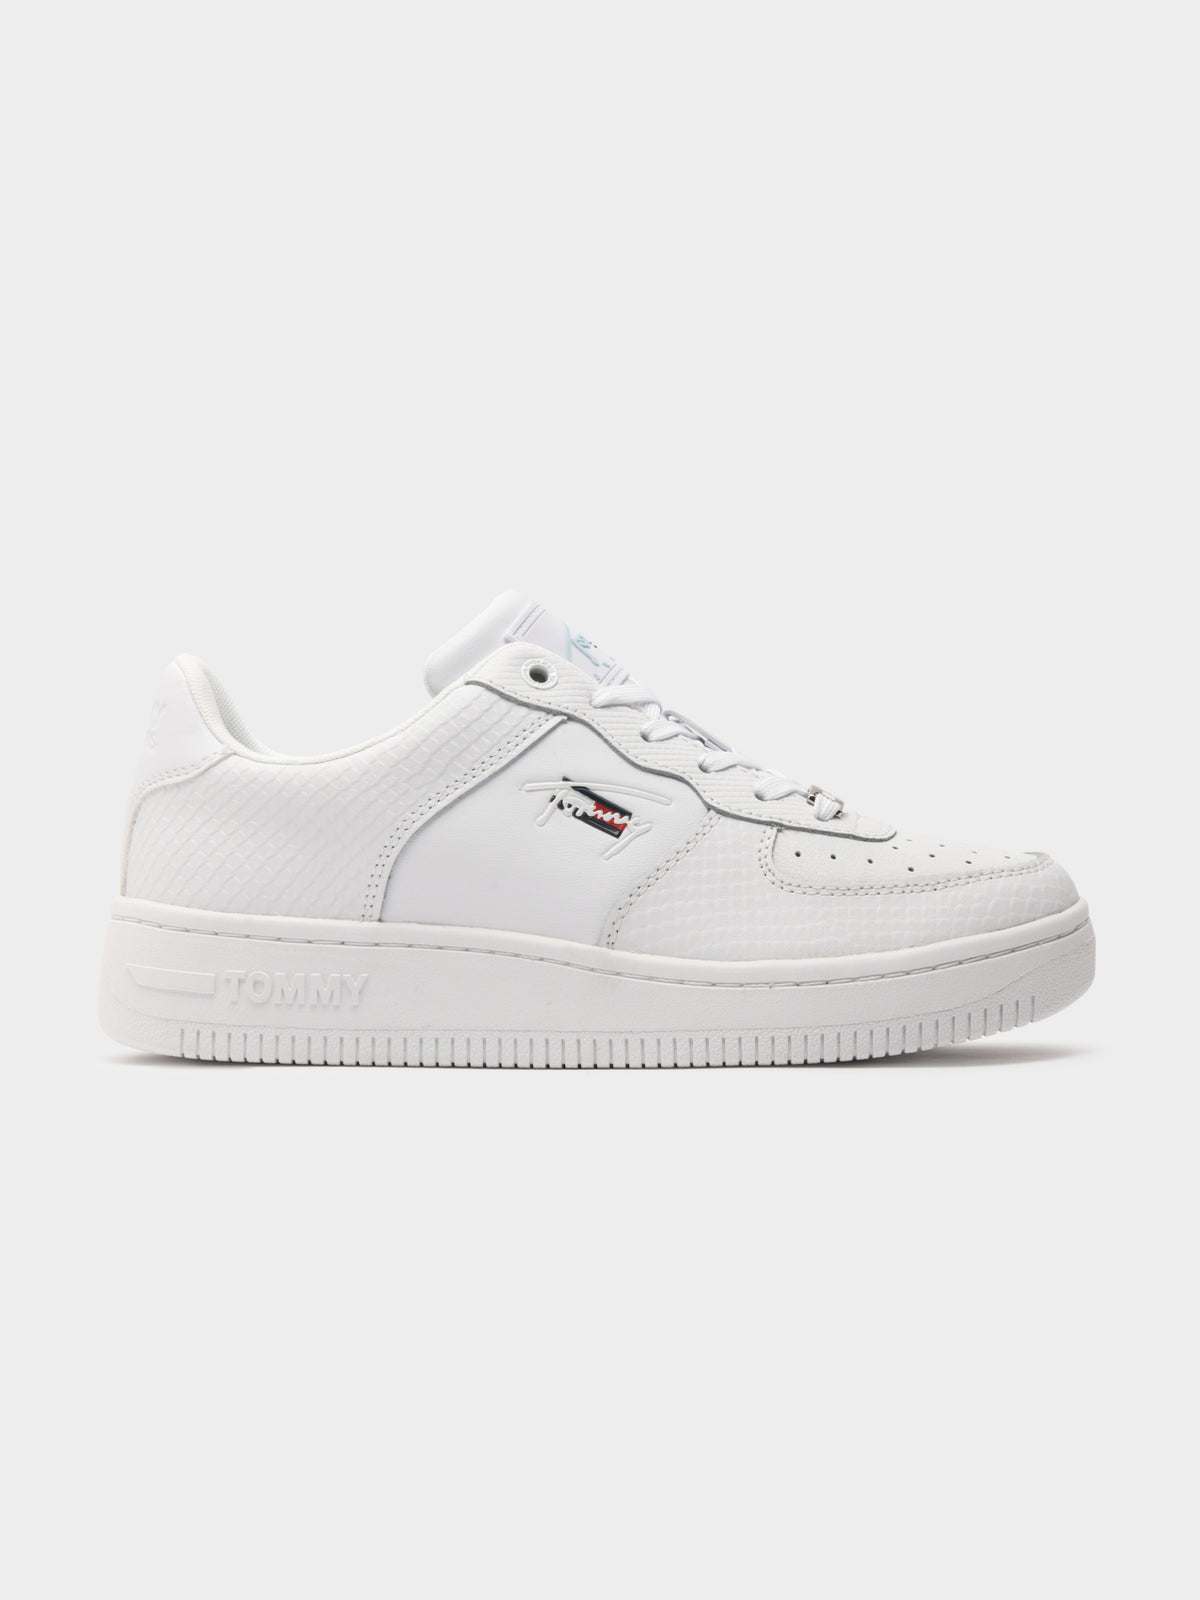 Womens Textured Leather Basket Cupsole Sneakers in White